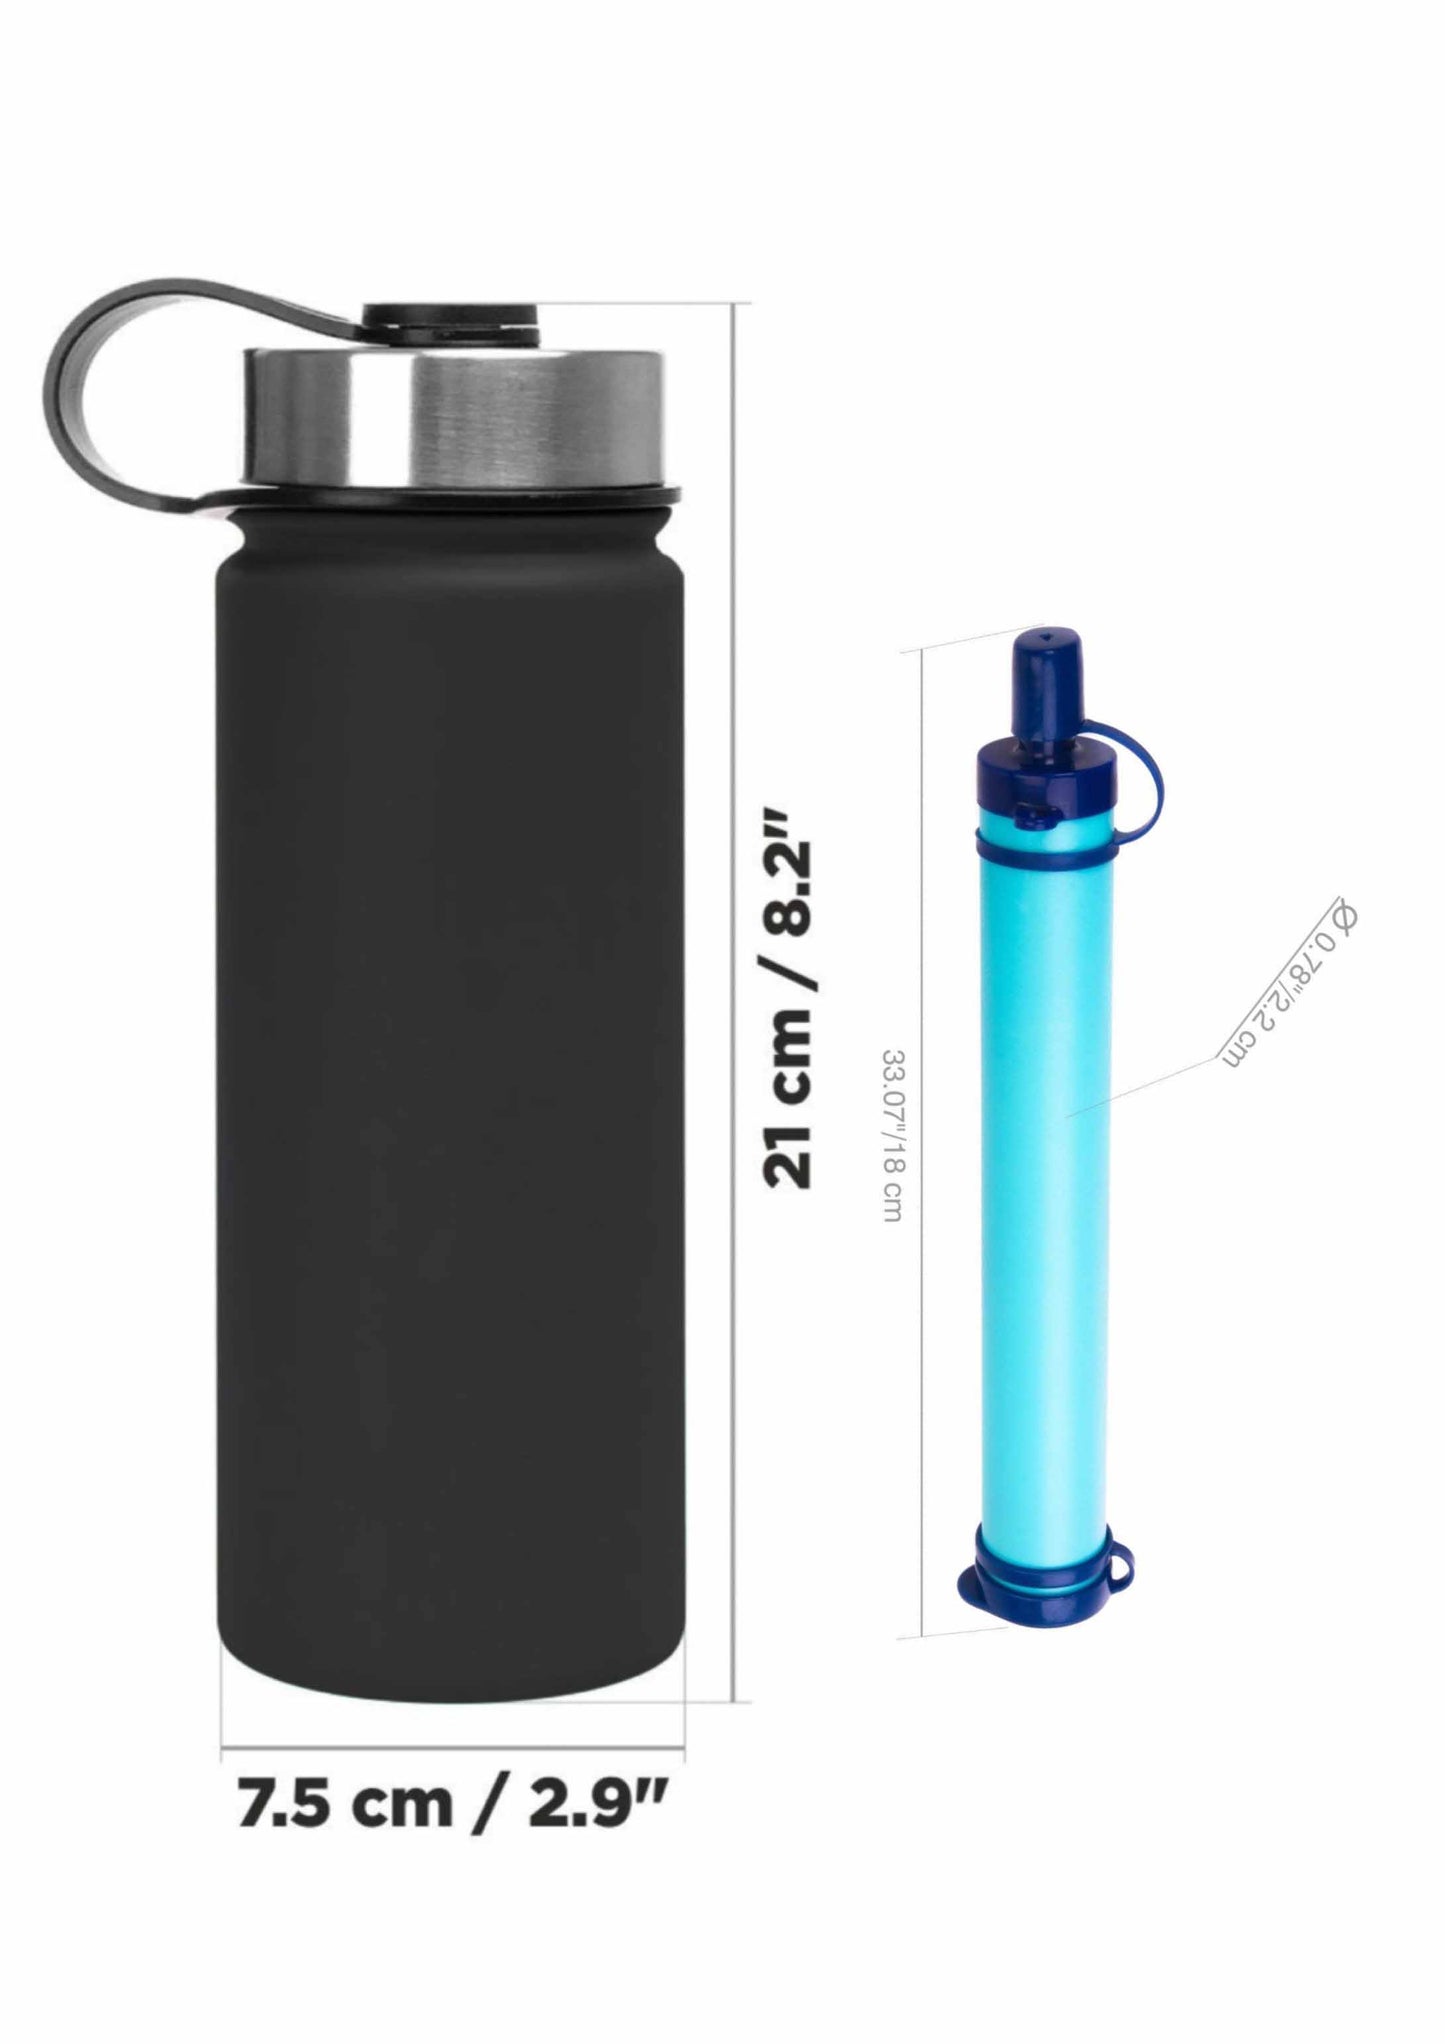 18 oz Stainless Steel Water Bottle is 8.2 inches high and 2.9 inches wide. 